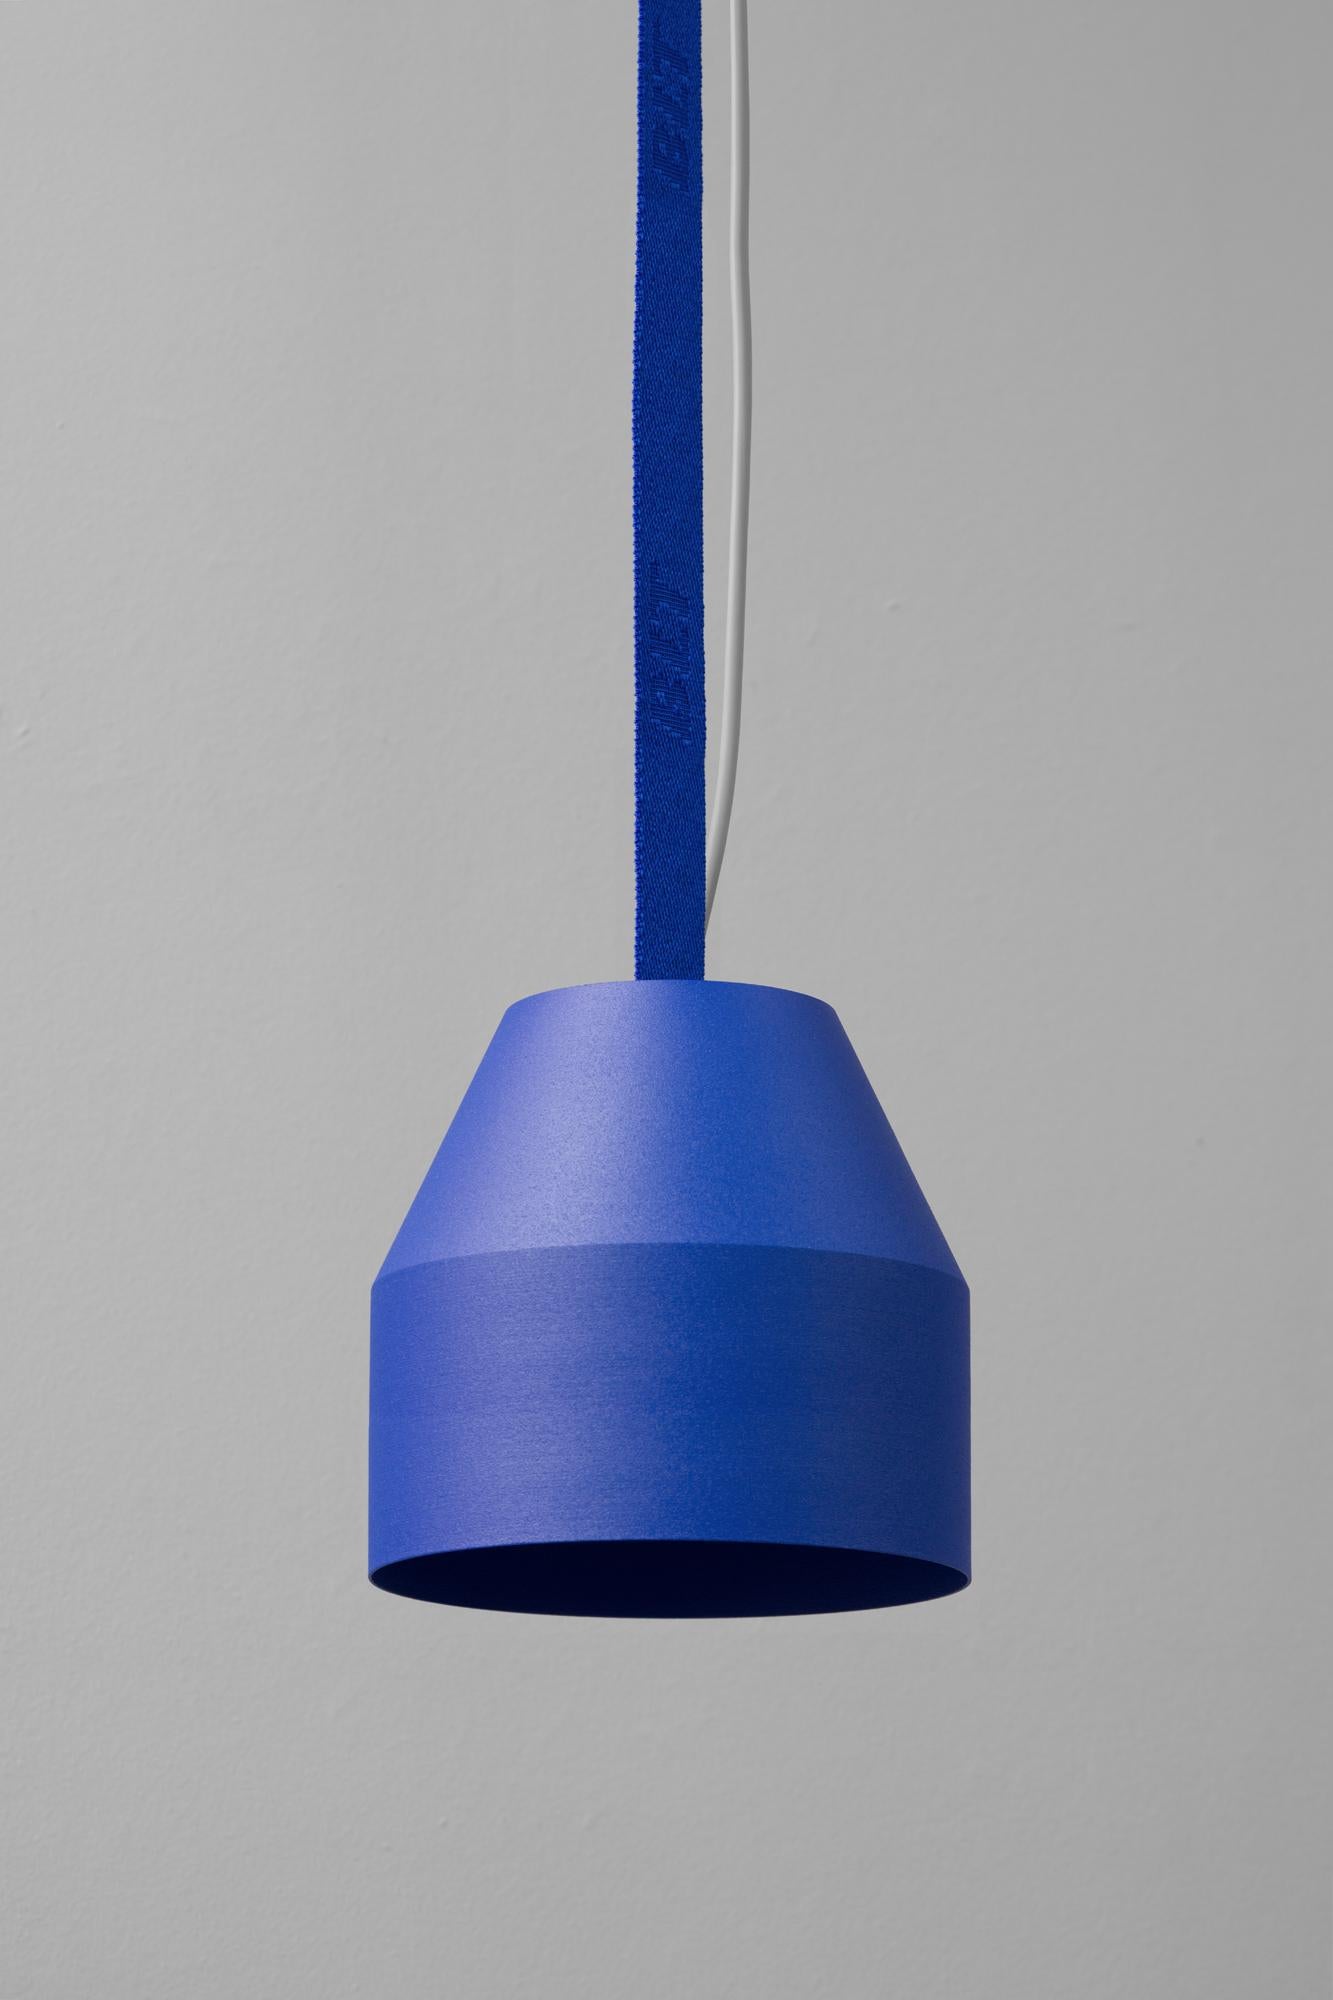 BLT_CAP Big Ultra Blue Pendant Lamp by +kouple
Dimensions: Ø 16 x H 16,5 cm. 
Materials: Powder-coated steel and textile.

Available in different color options. The rod length is 250 cm. Please contact us.

All our lamps can be wired according to